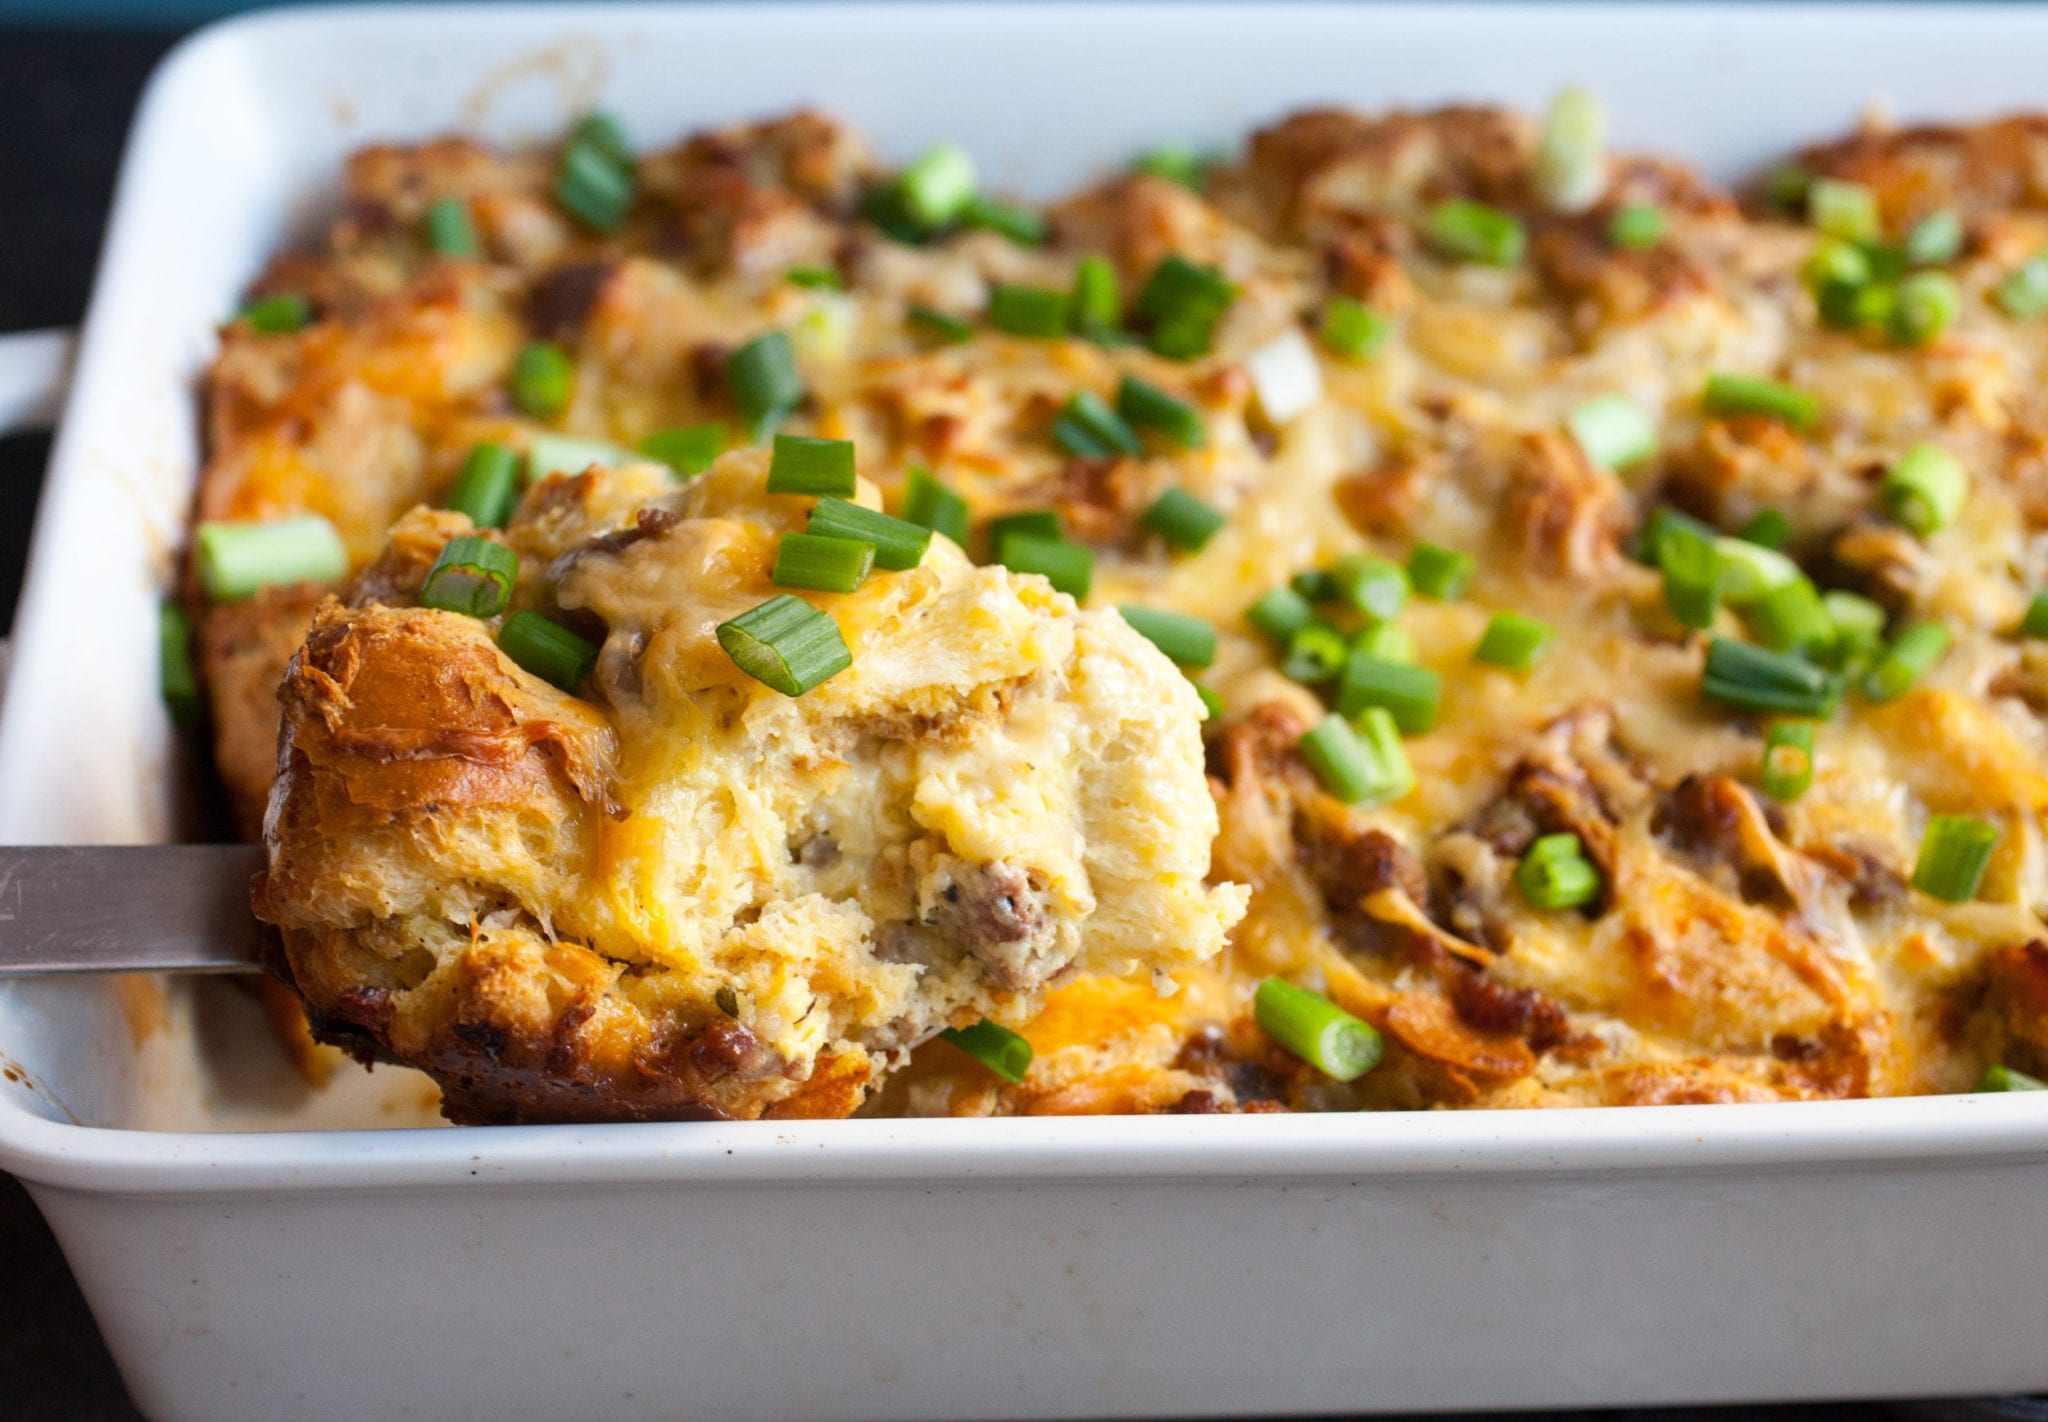 The Most Delicious Gluten-Free Casserole You'll Ever Make